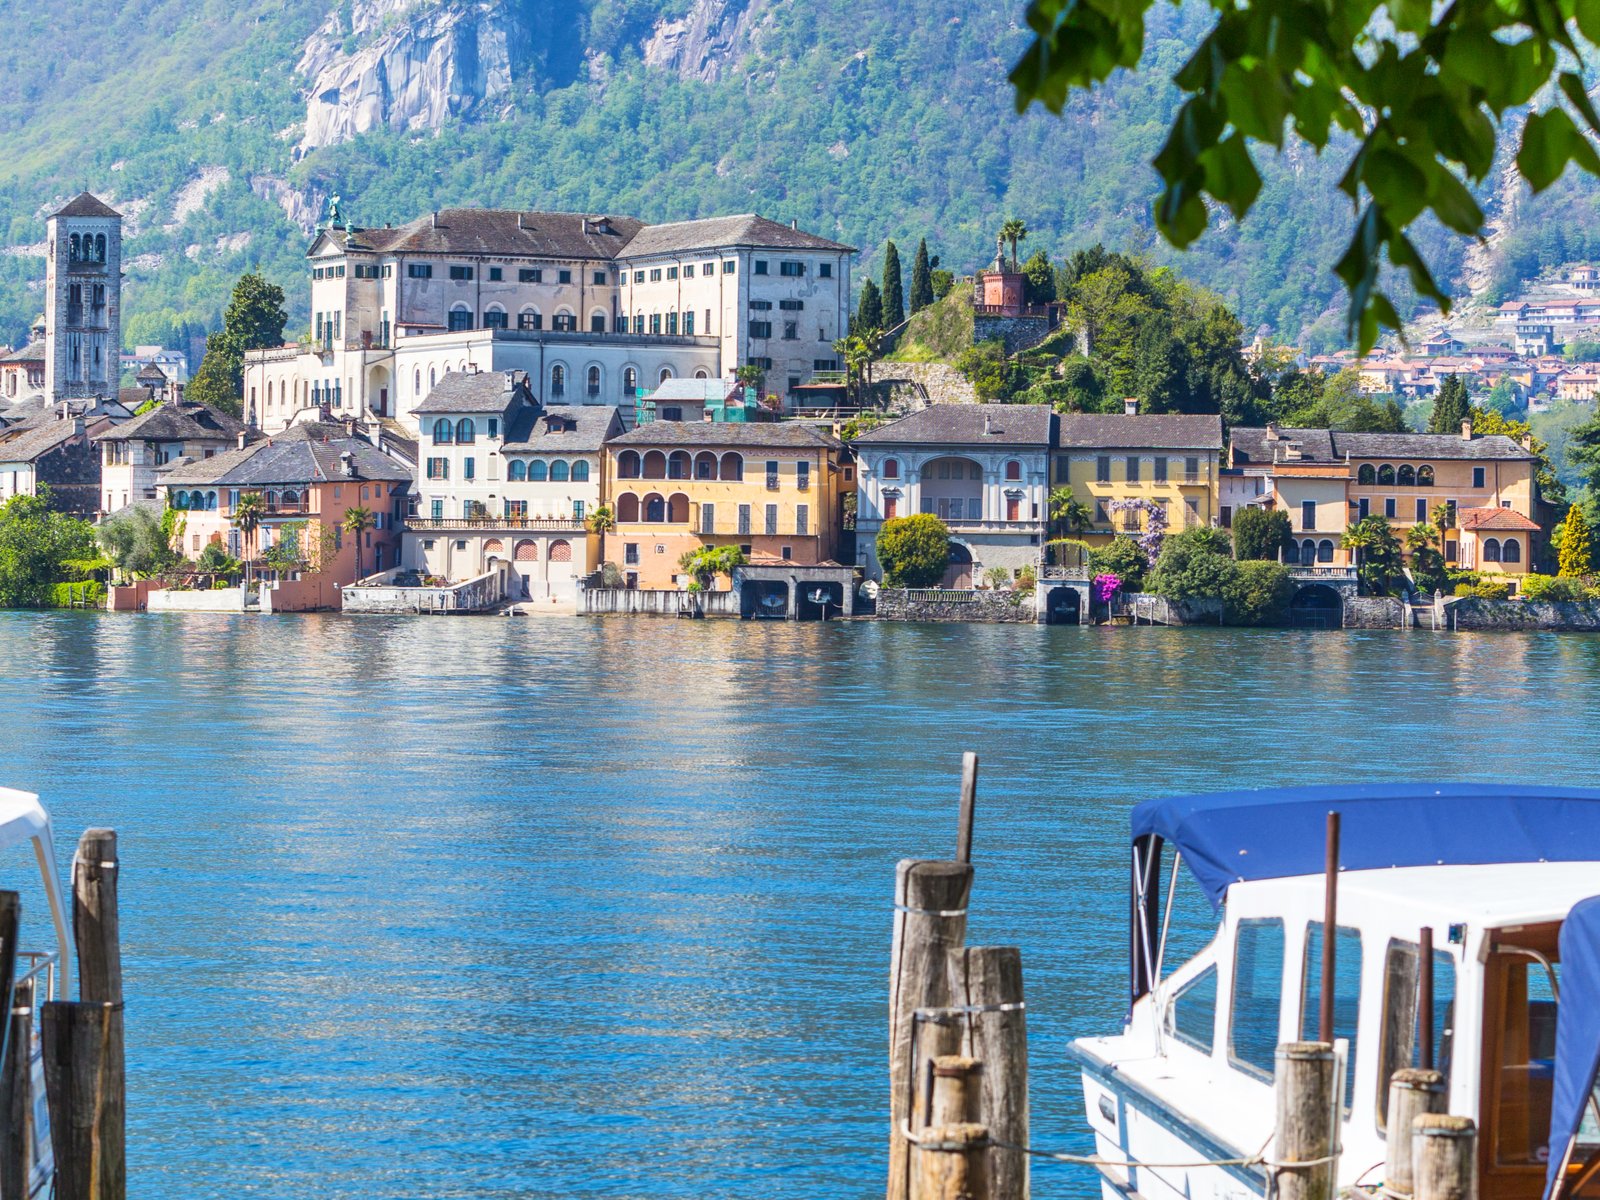 Orta San Giulio is home to the newest three Michelin star restaurant in Italy.